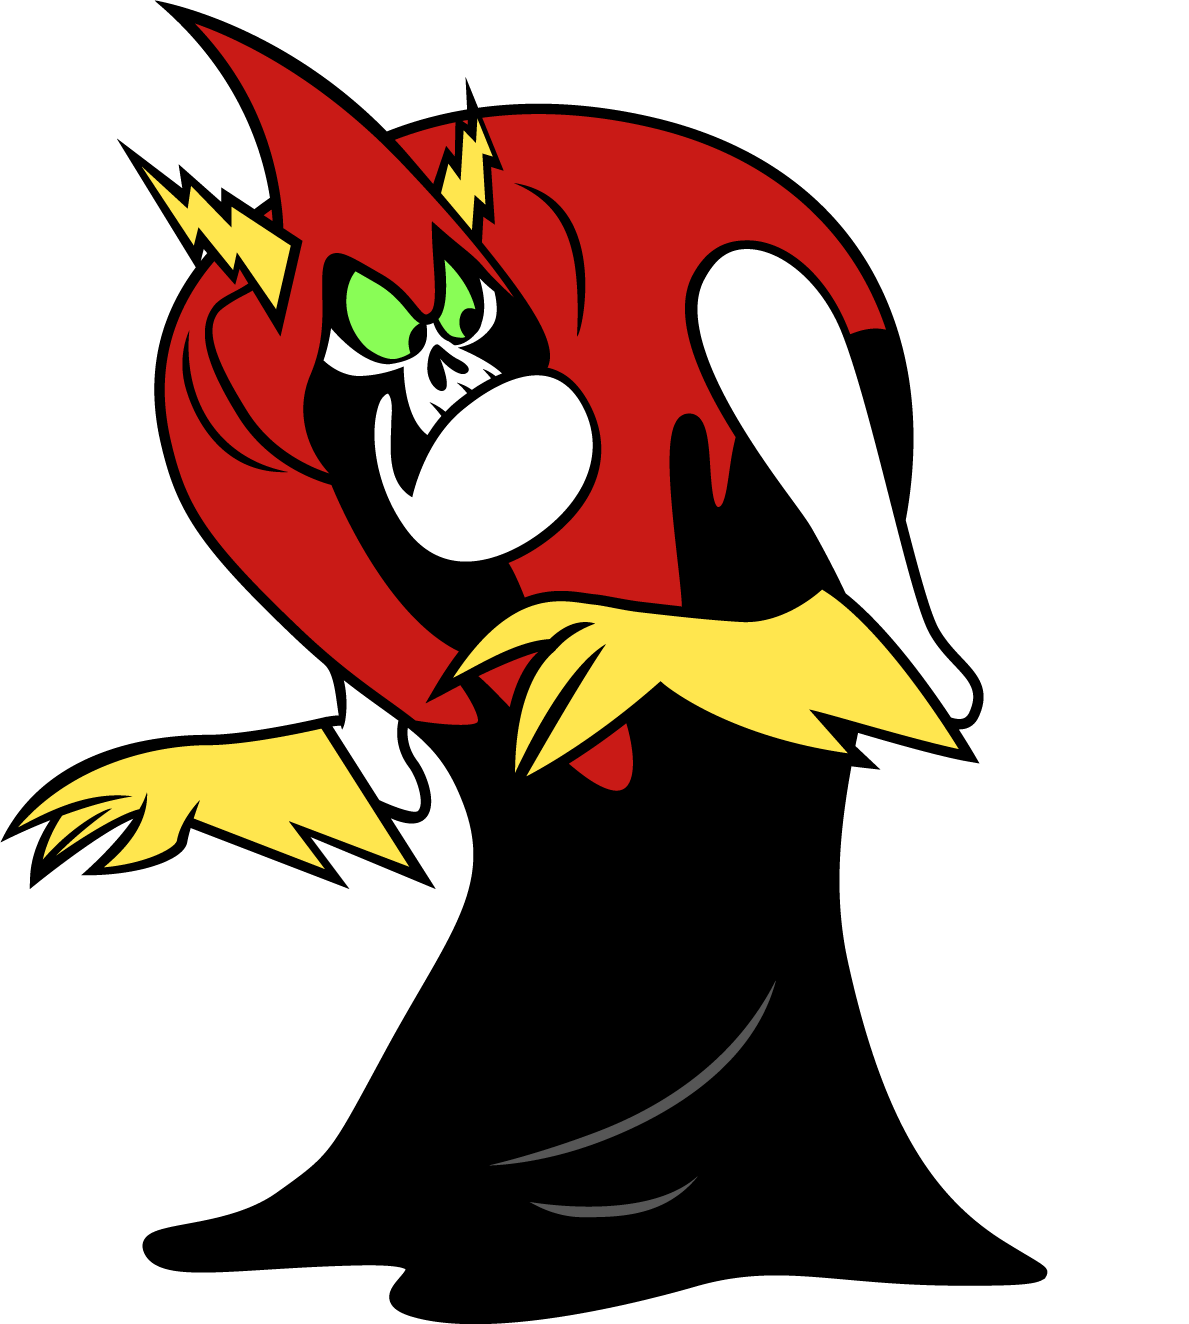 Spaceship clipart evil. Lord hater hates death